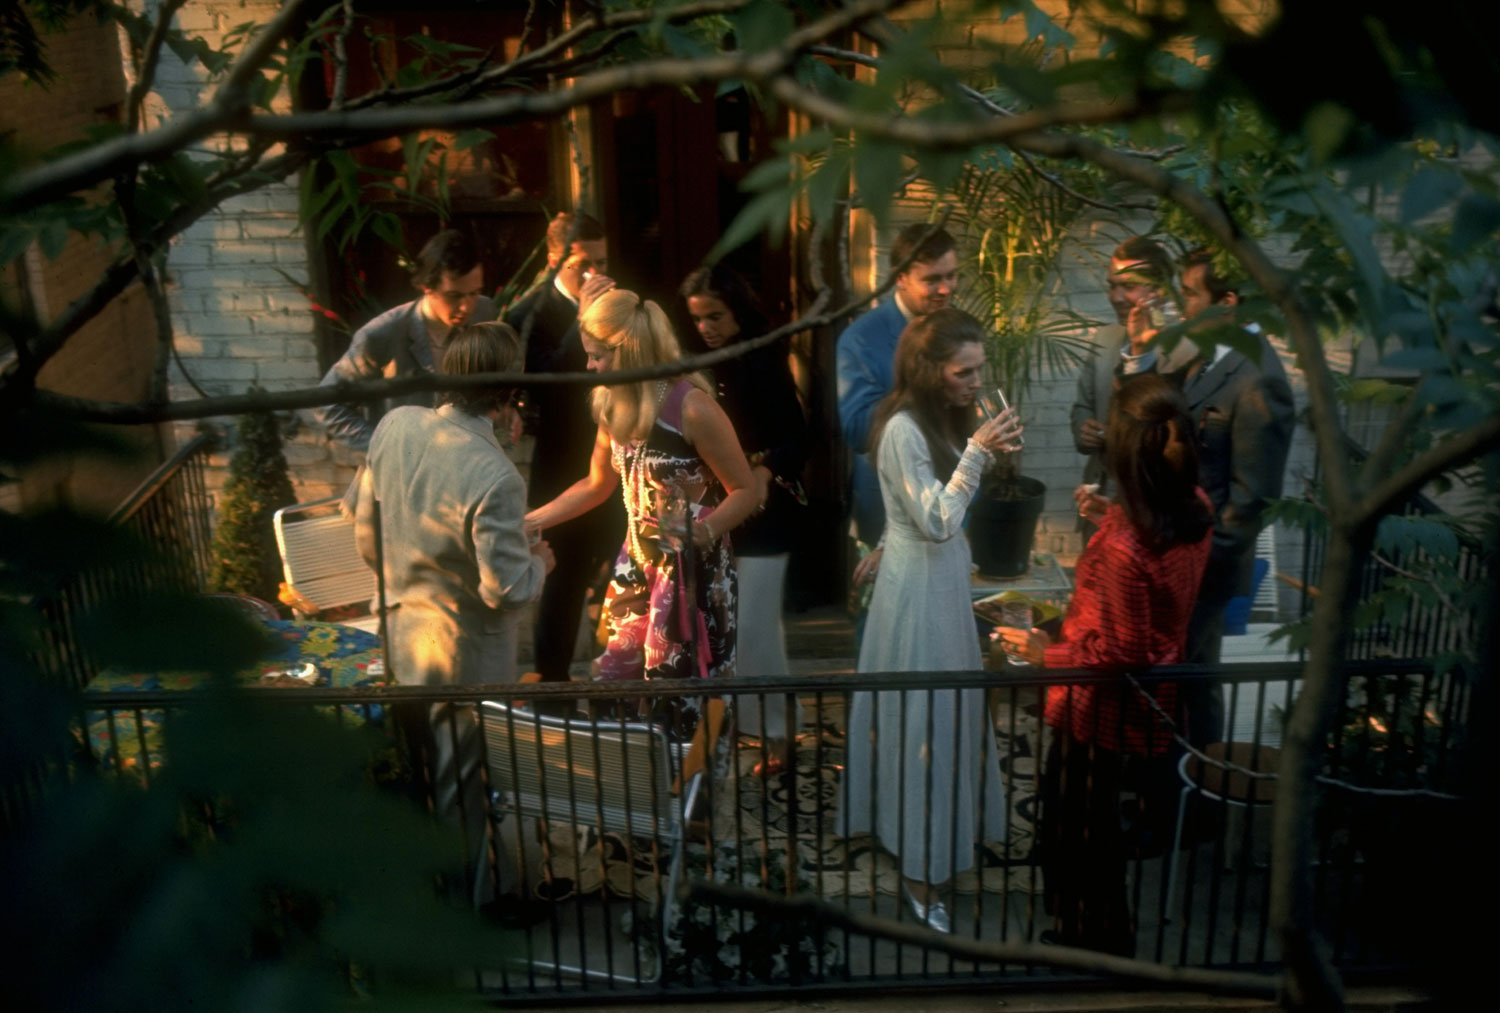 Private party on the balcony of a New York City apartment building, summer 1969.